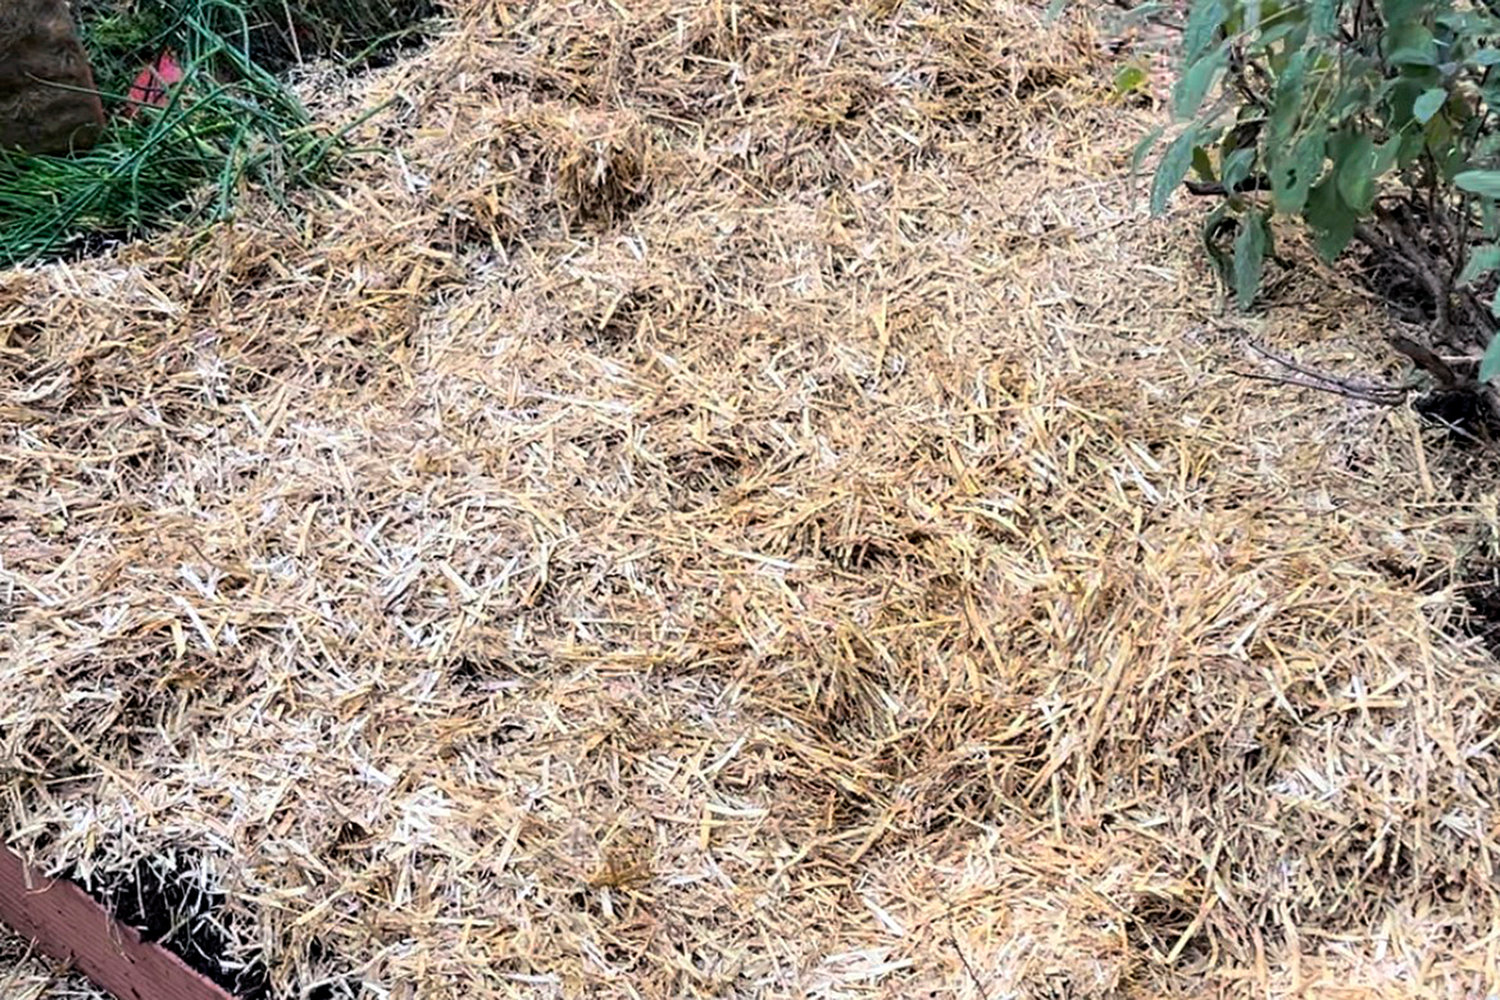 A thick layer of straw mulch spread over a bed of newly planted garlic cloves.